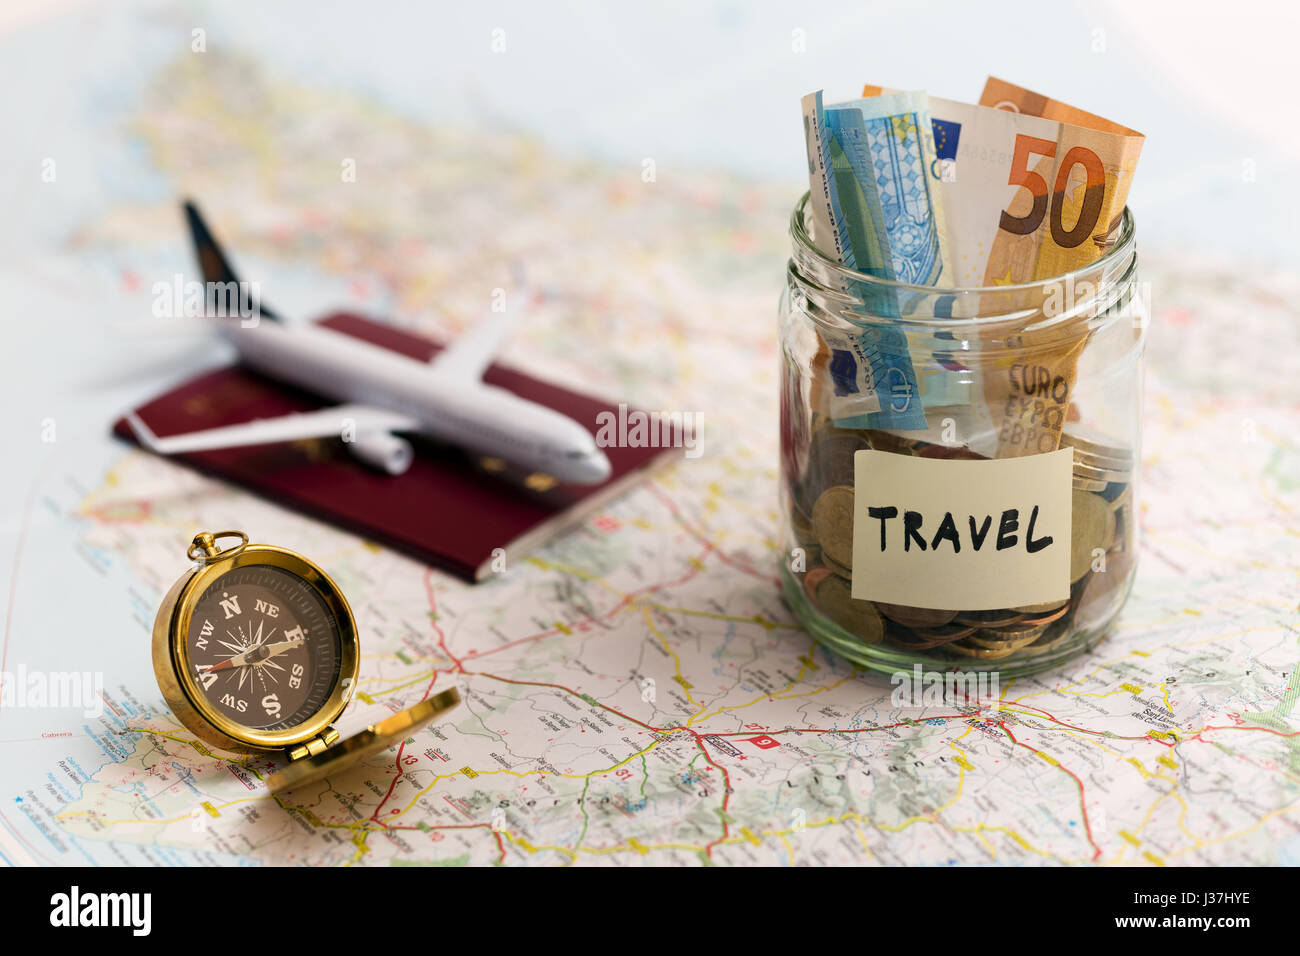 travel concept - money savings, compass and passport on a map Stock Photo